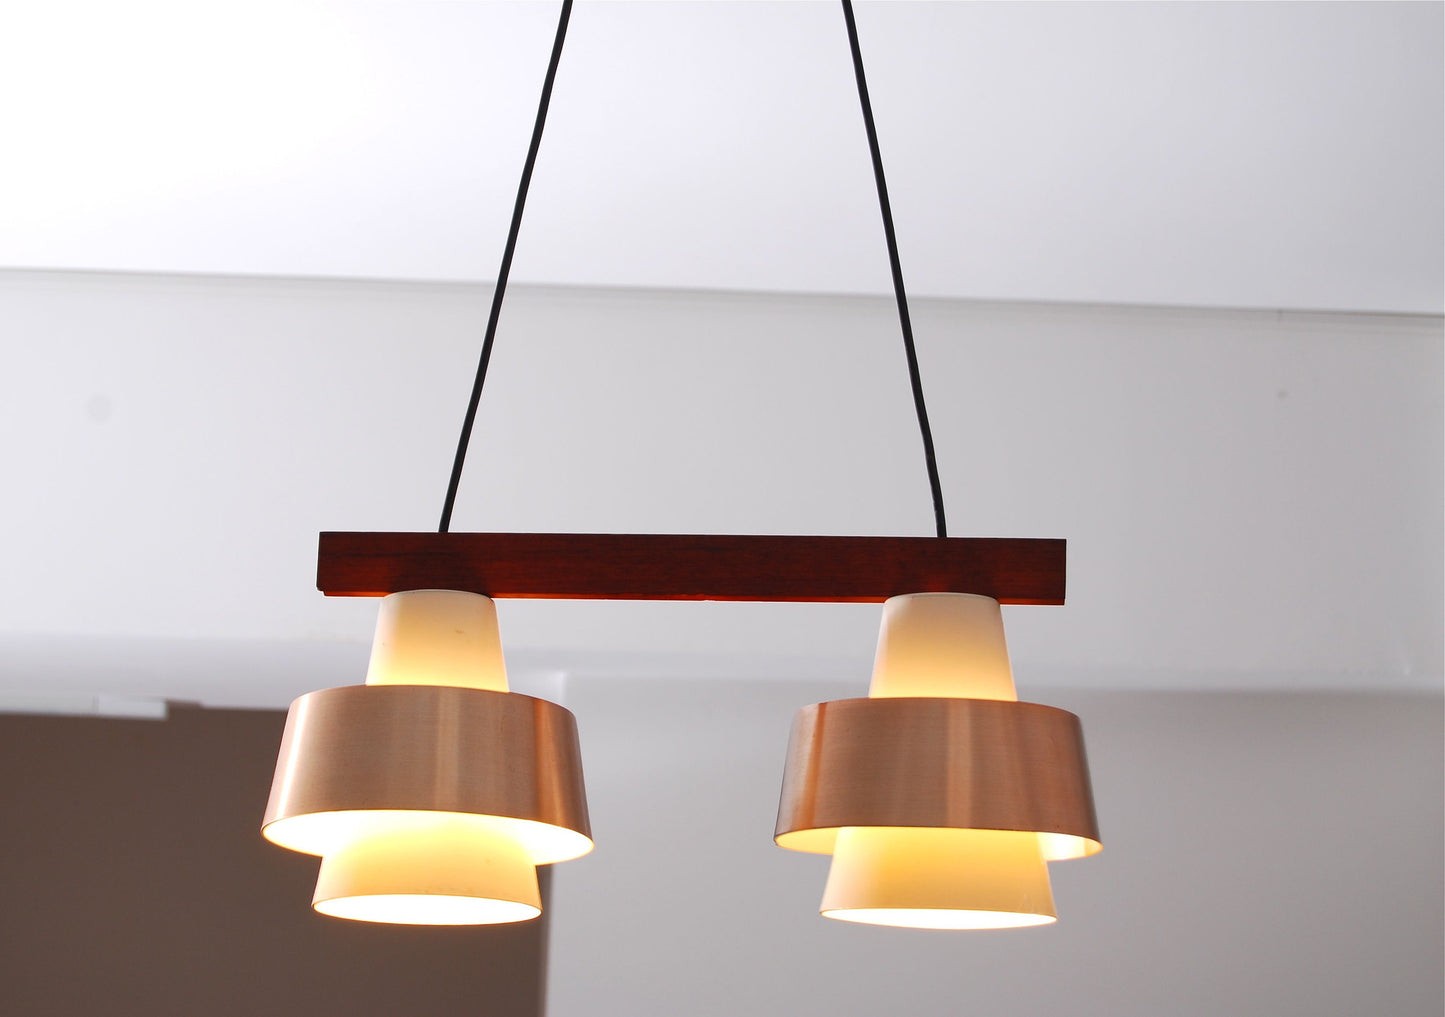 Twin-headed ceiling lamp with teak detail